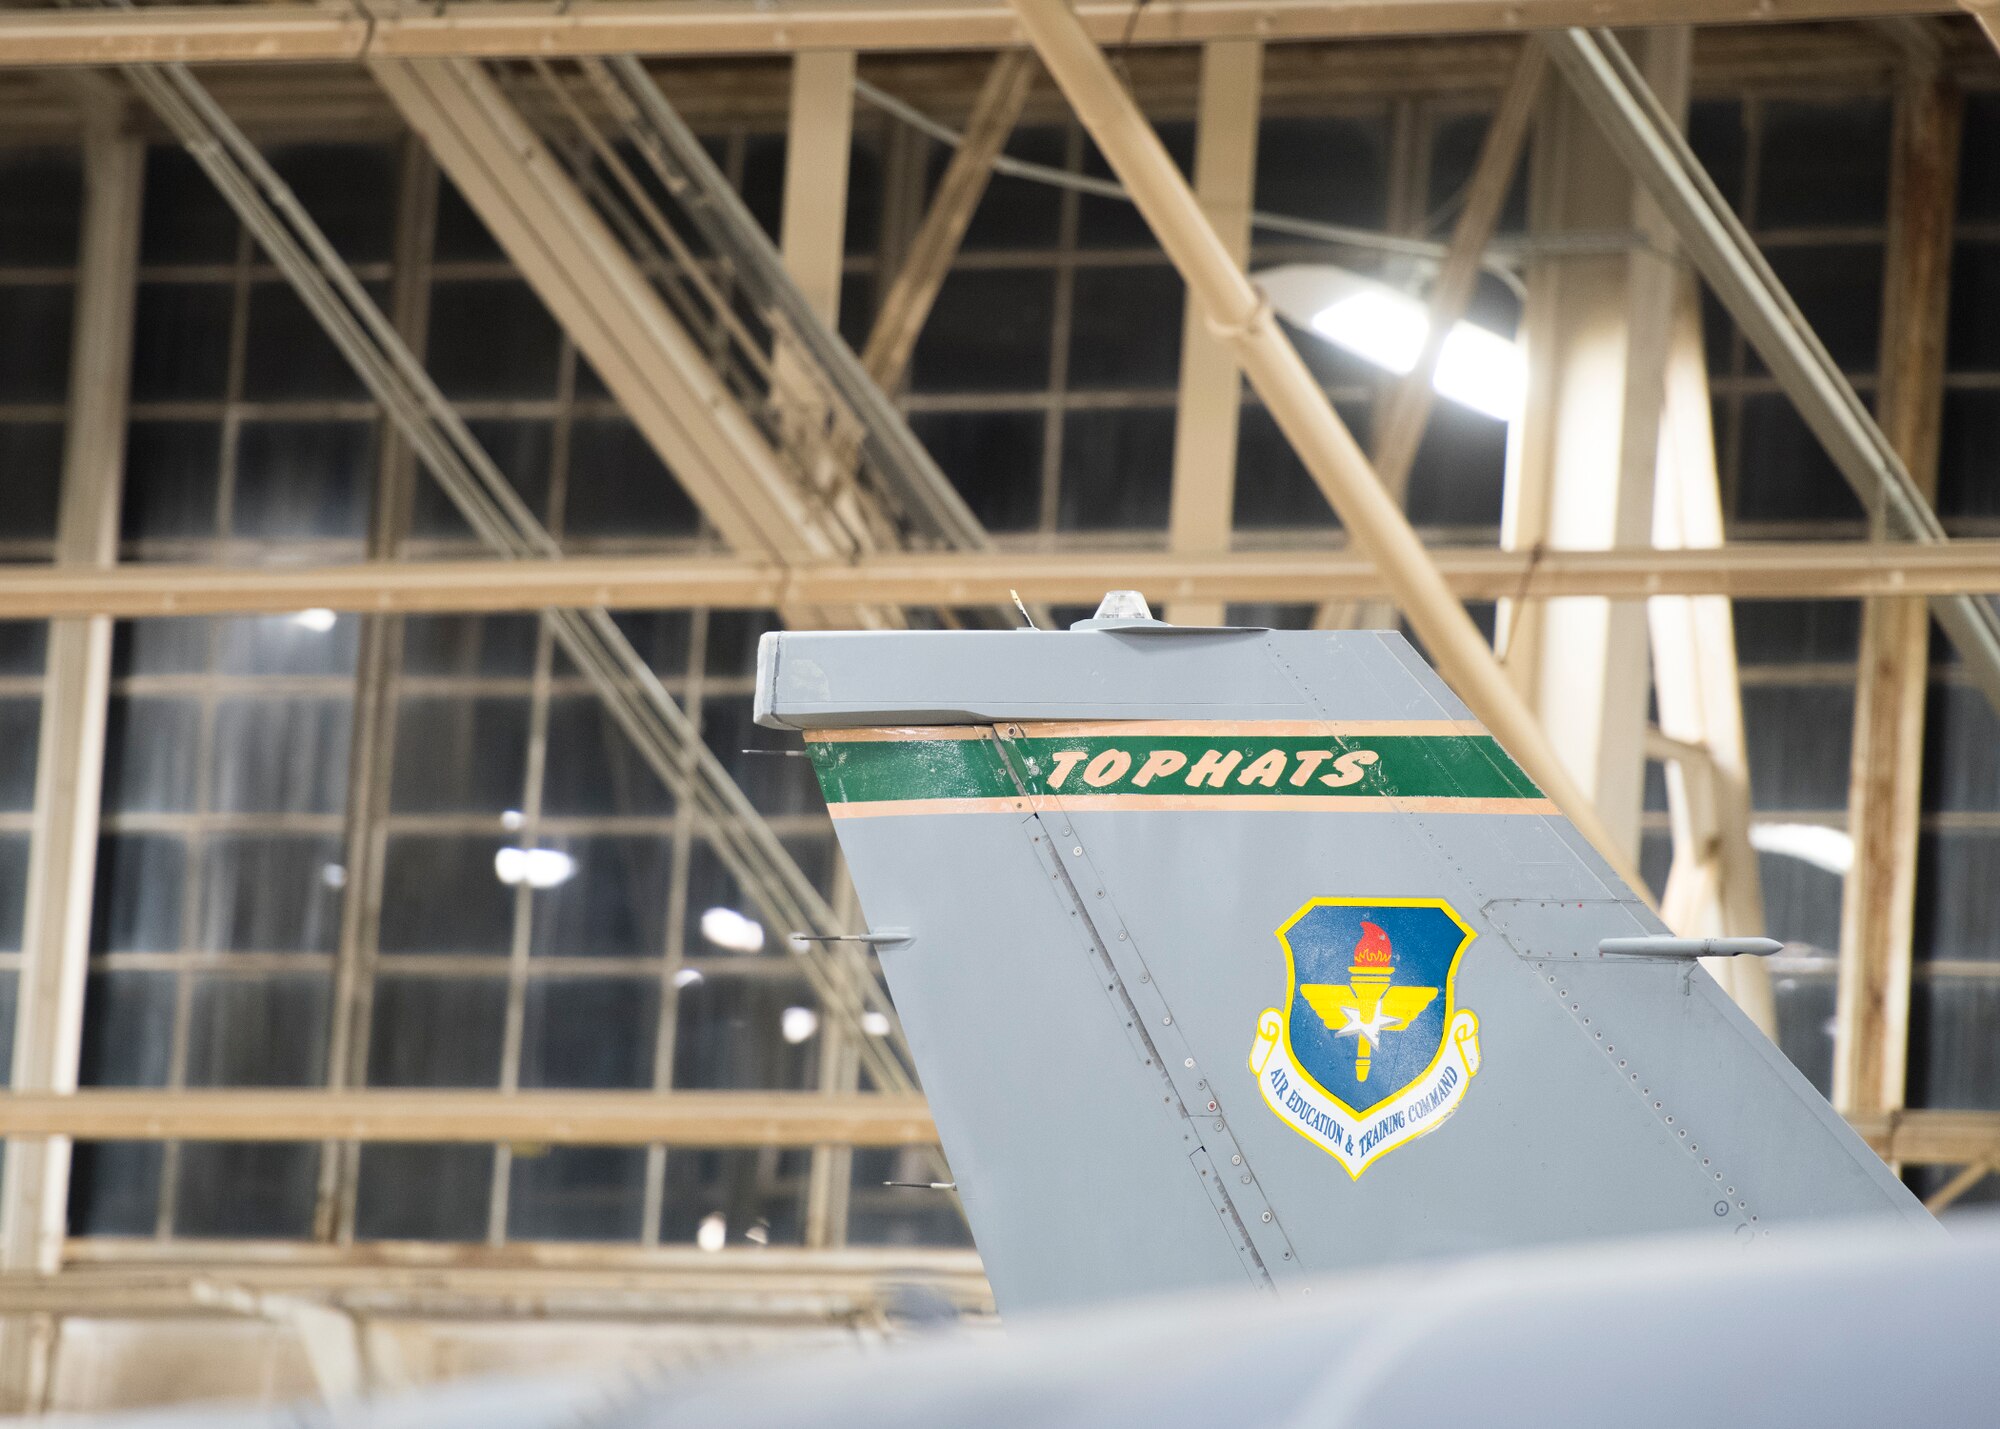 An F-16 Fighting Falcon assigned to the 310th Fighter Squadron “Tophats” sits in a hangar June 24, 2020, at Luke Air Force Base, Ariz.